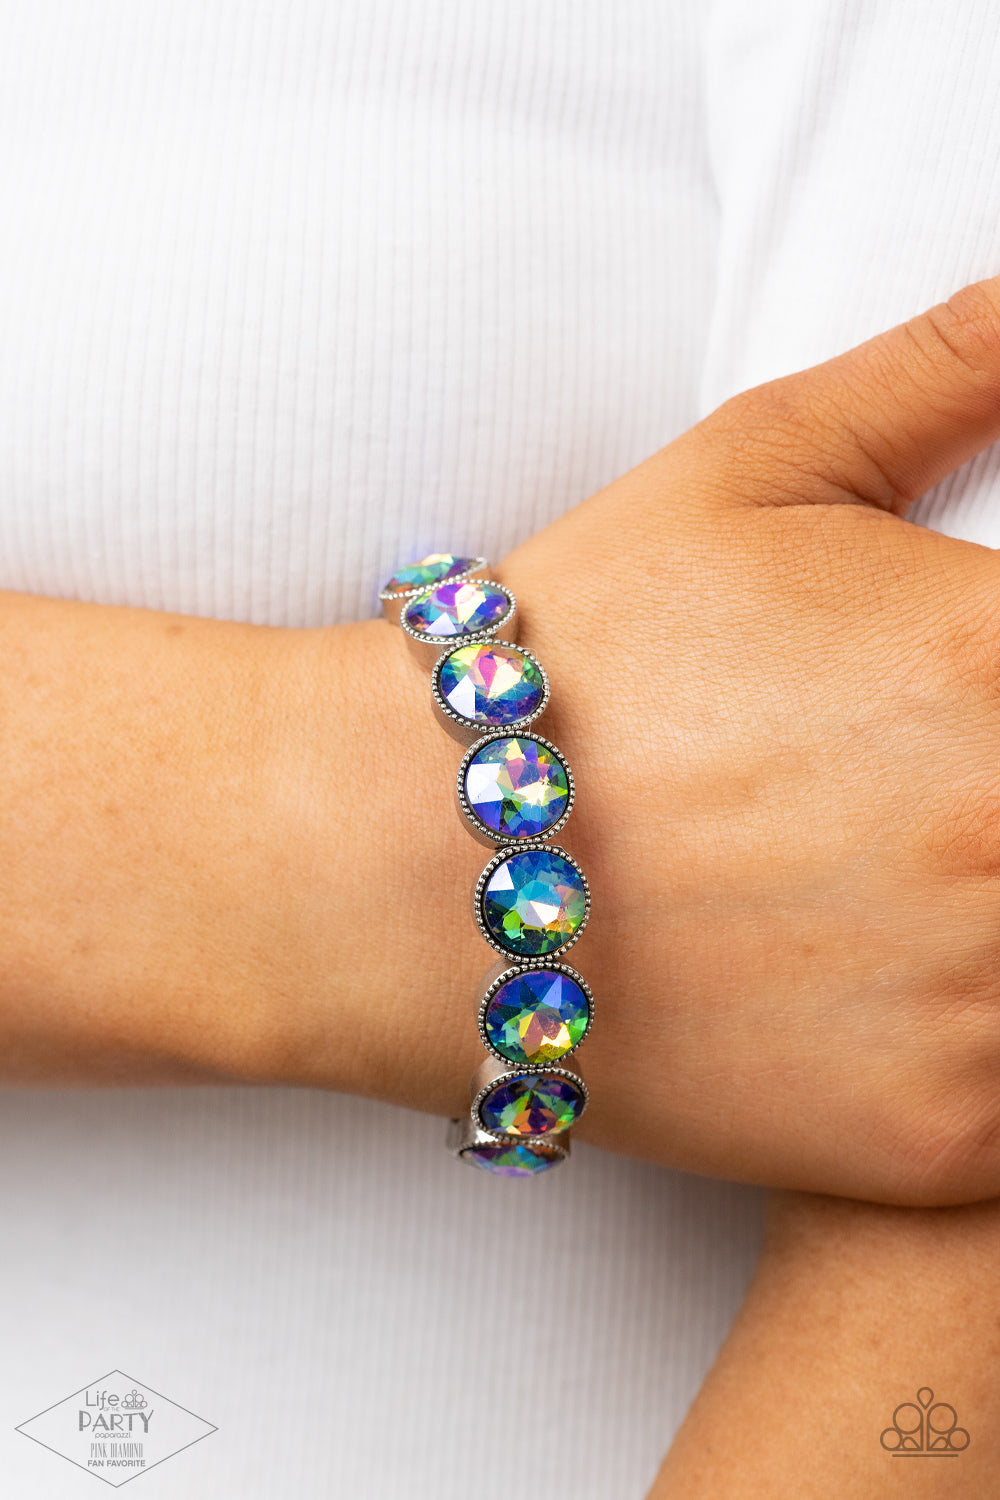 Faceted oil spill-like iridescent gems are pressed into sleek silver frames. The glittery frames are threaded along elastic stretchy bands, creating a glamorous look around the wrist.  Sold as one individual bracelet.